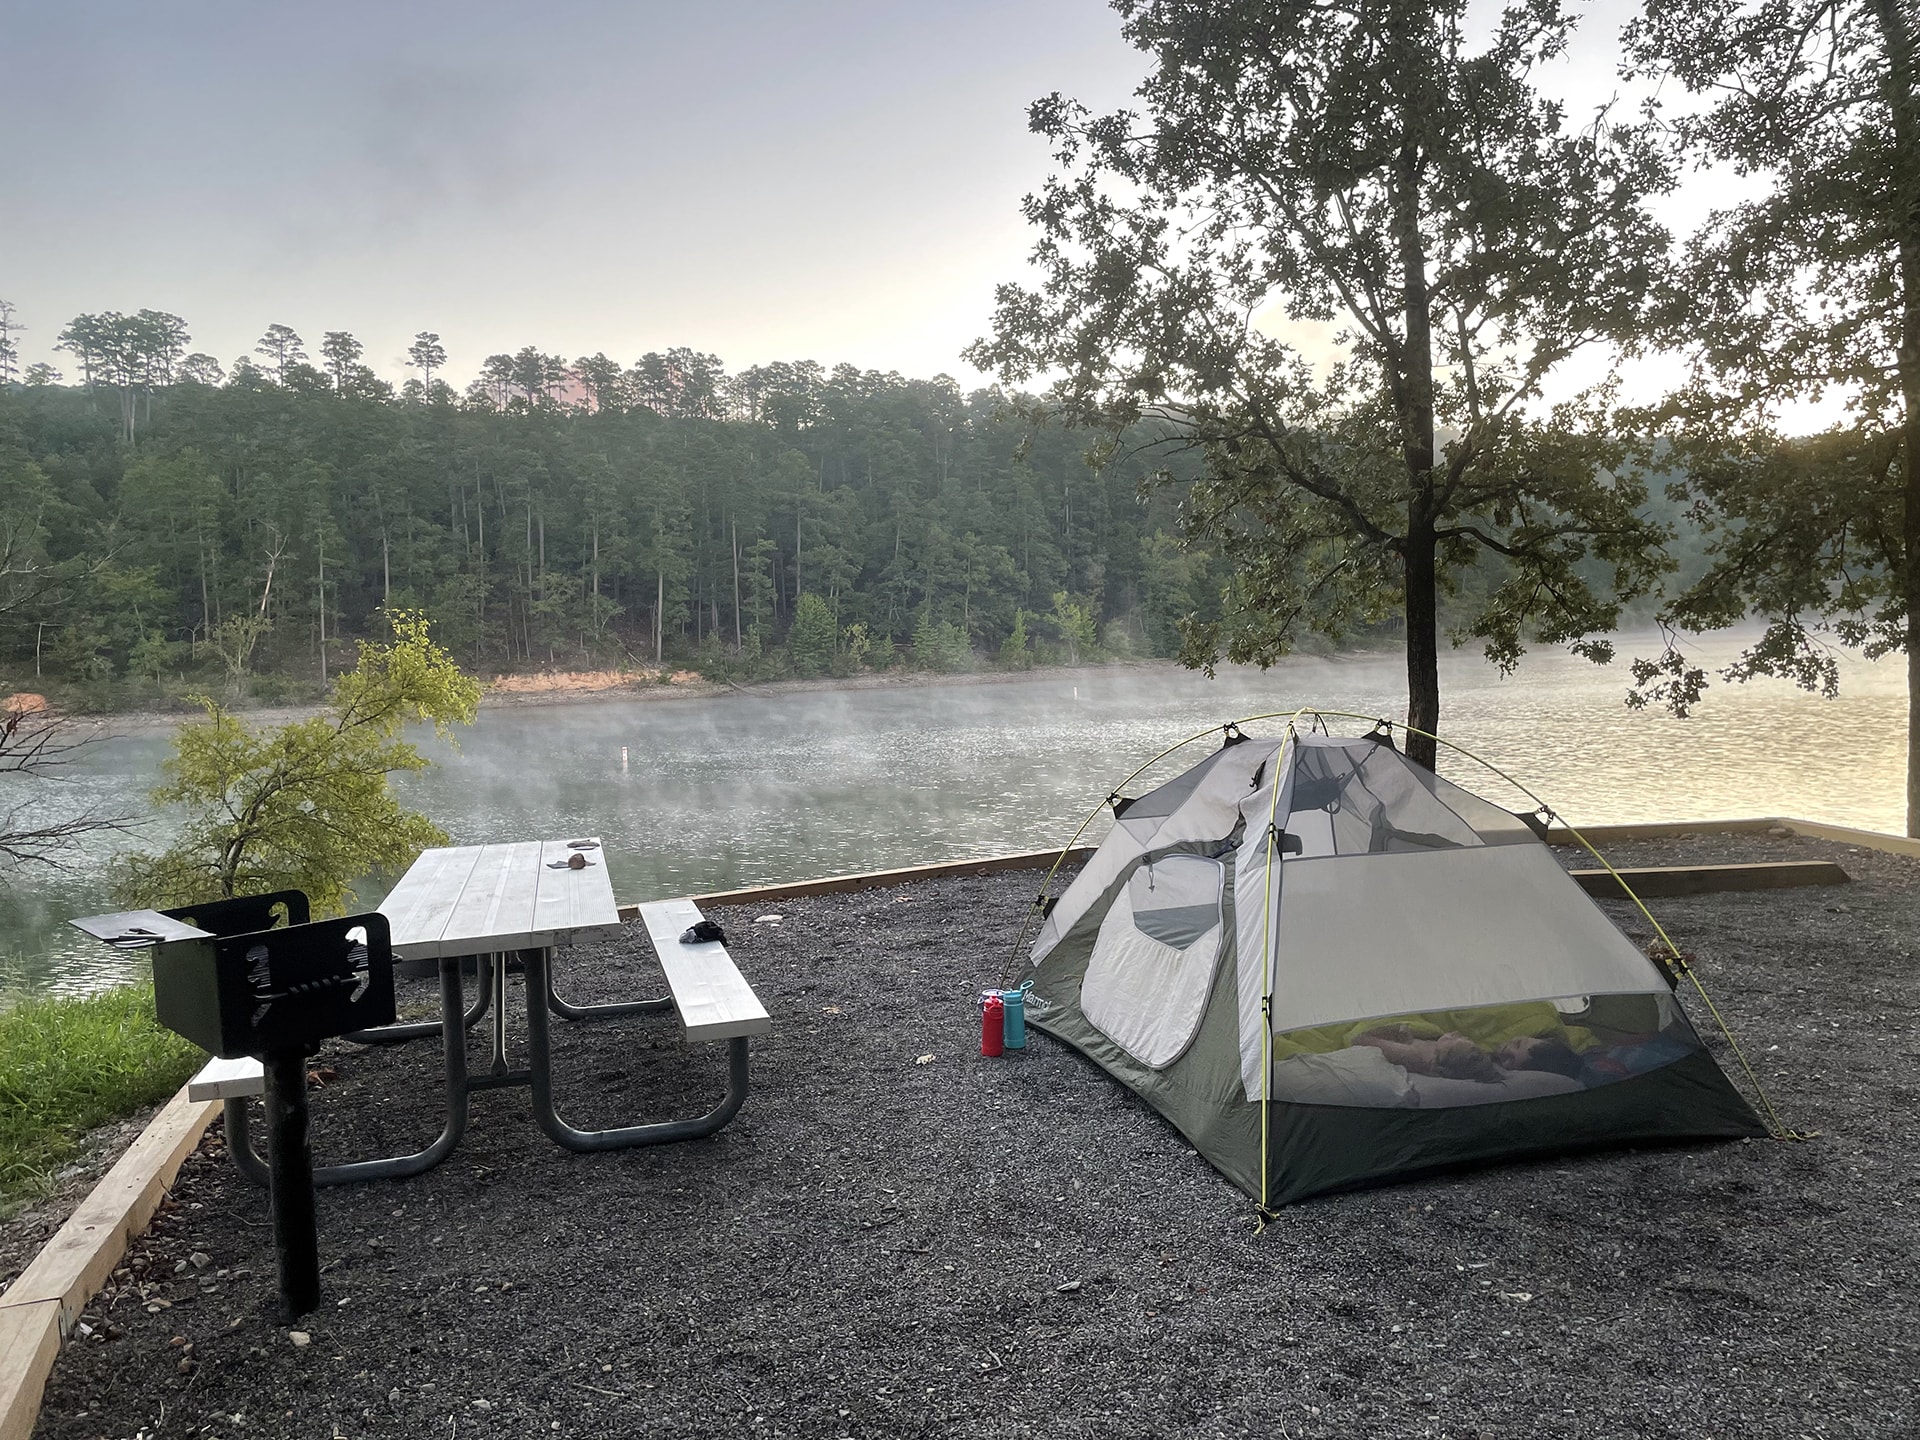 A campsite at crystal springs campground